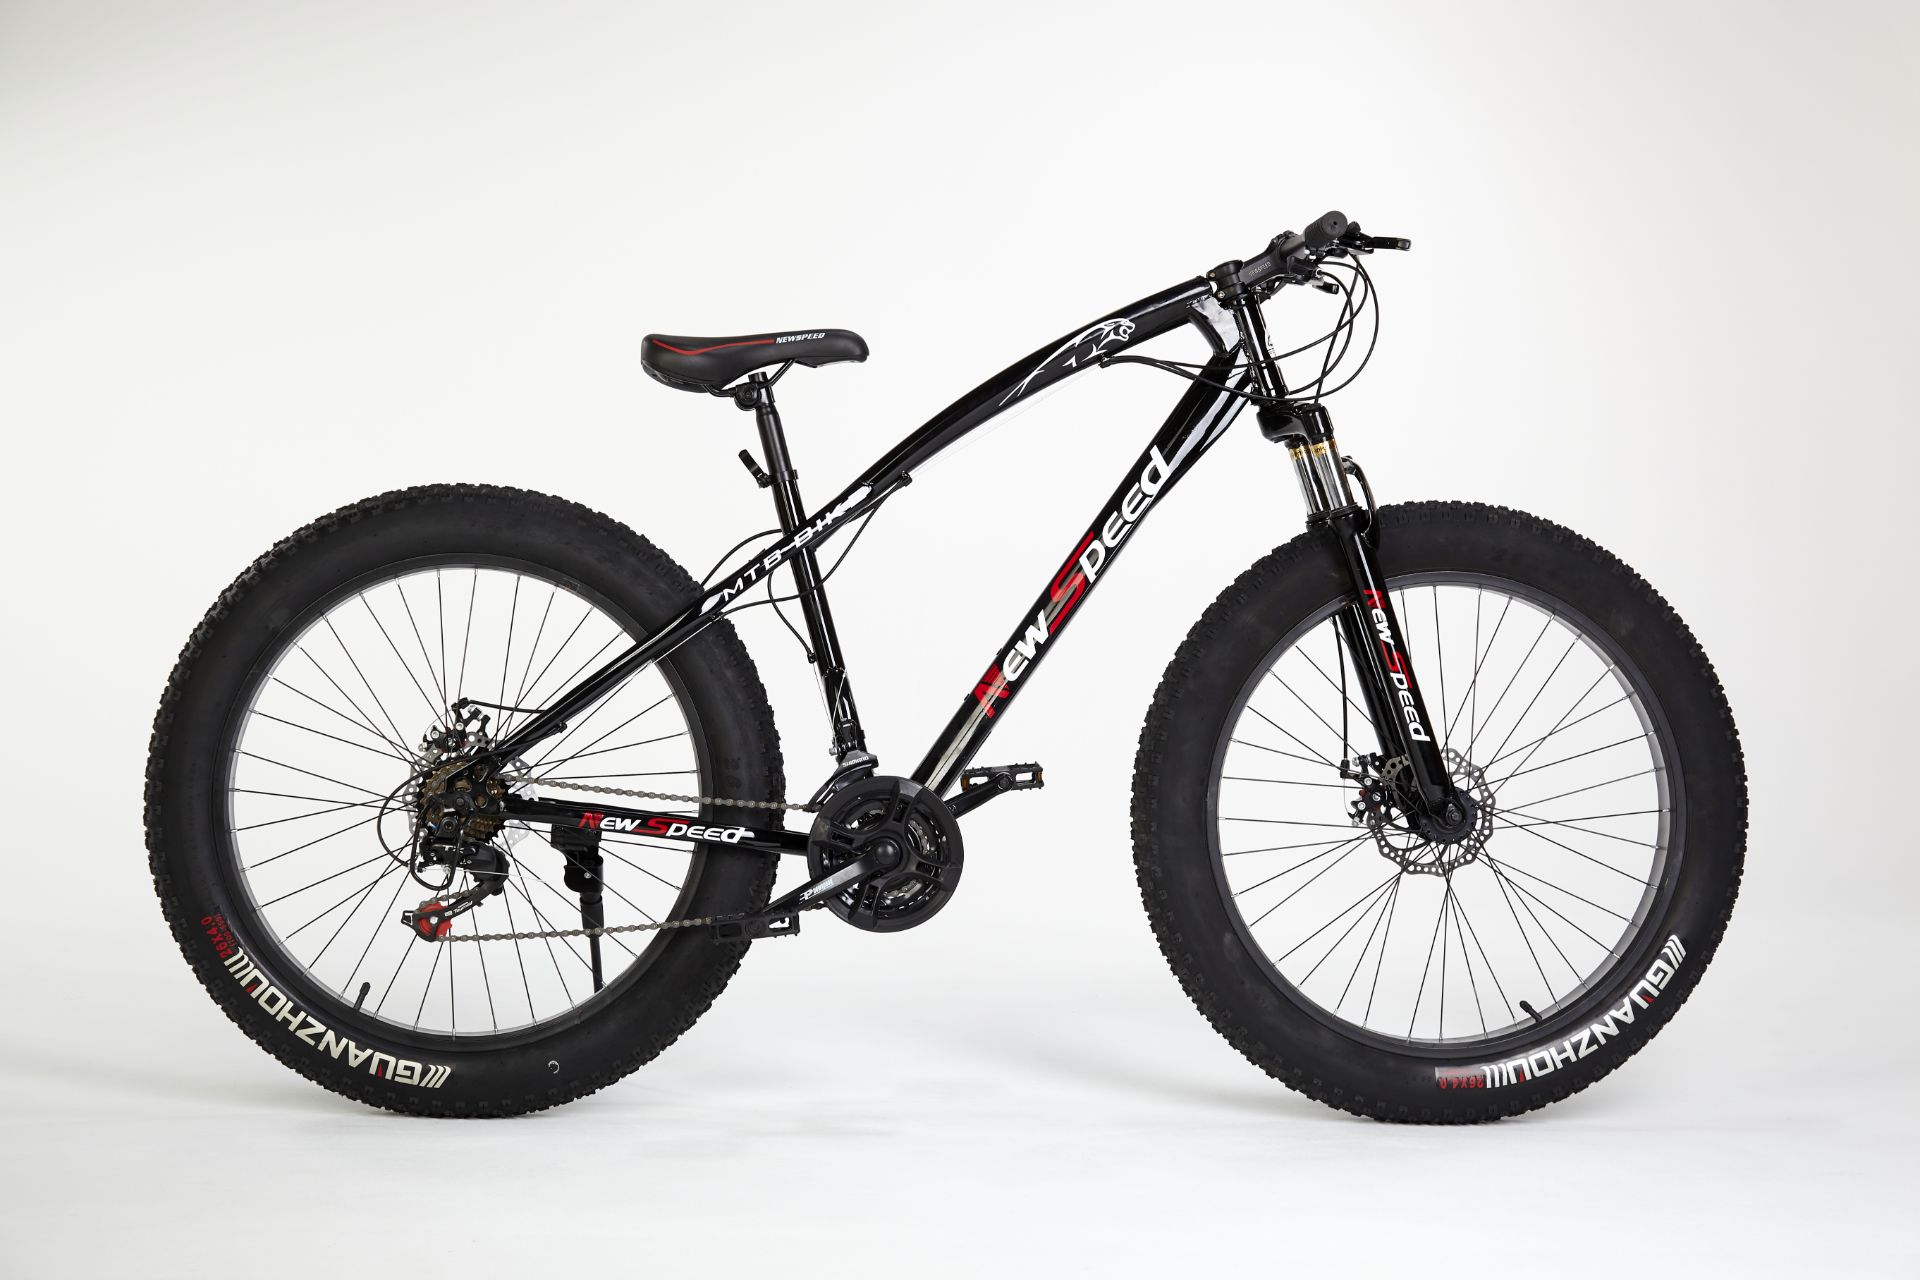 MOUNTAIN BIKE BICYCLE MEN/WOMEN FAT TIRE 26" WITH FRONT SUSPENSION - BLACK (04) - Image 2 of 12